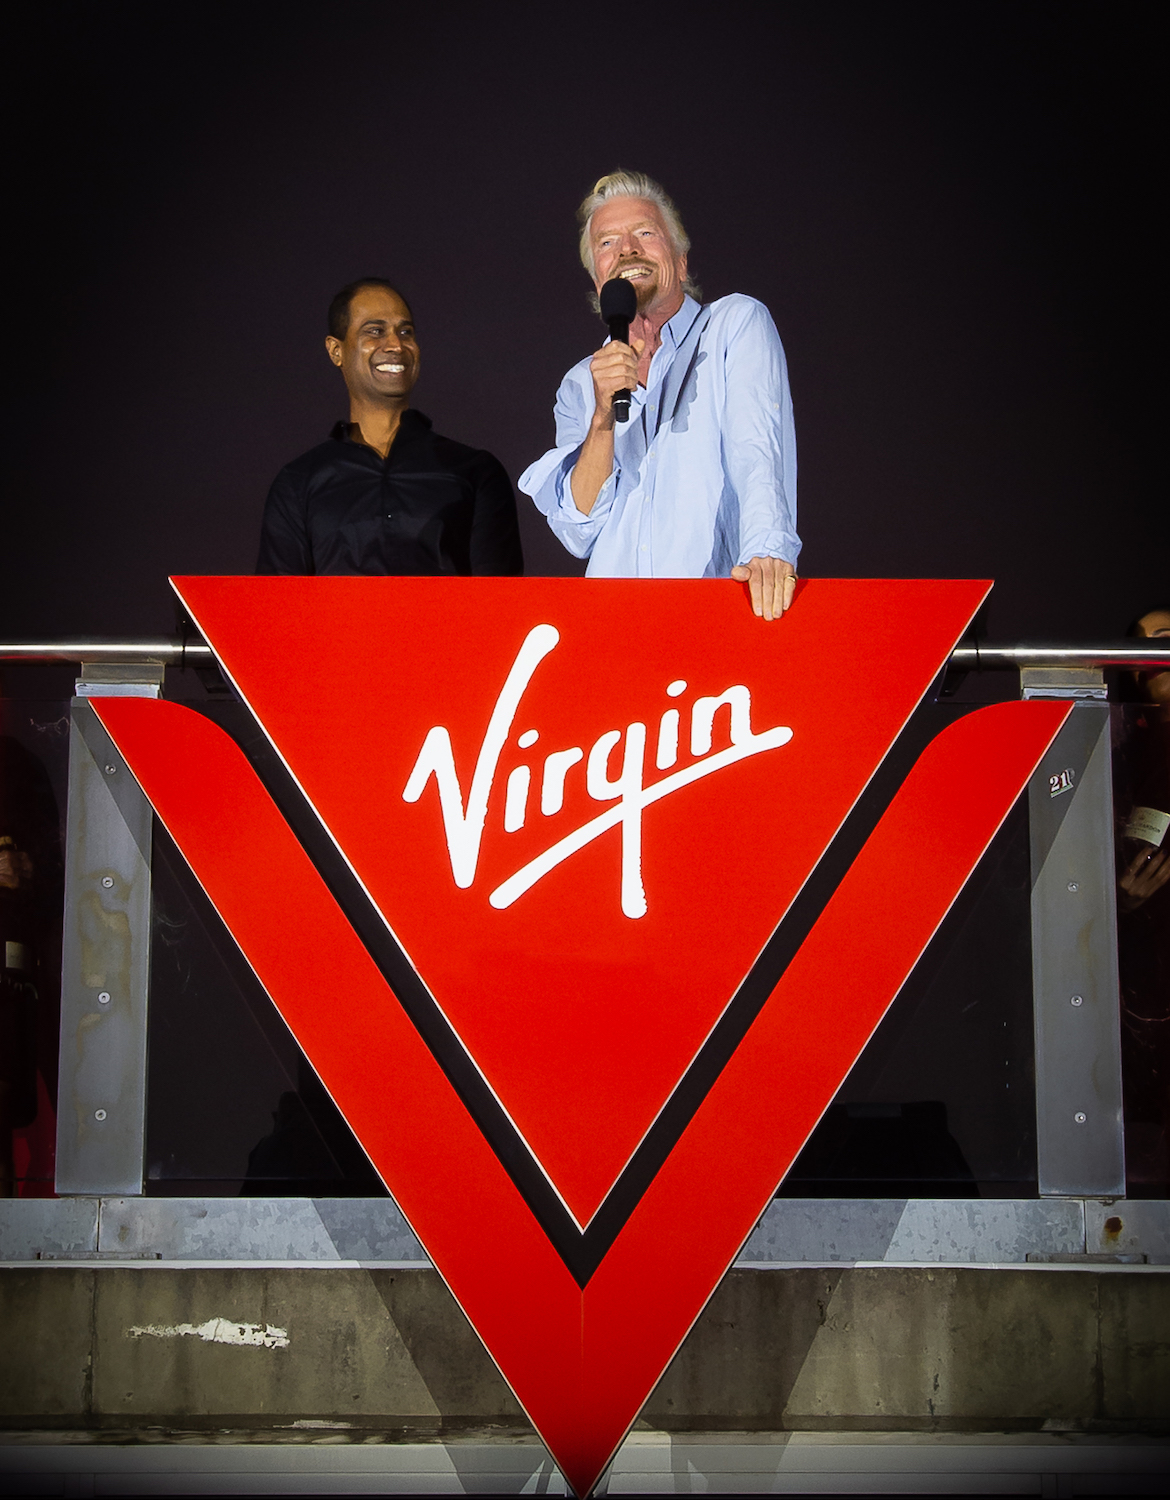 Virgin Voyages chief commercial officer Nirmal Saverimuttu and Sir Richard Branson launch Virgin Voyages in Sydney. (Virgin Voyages)